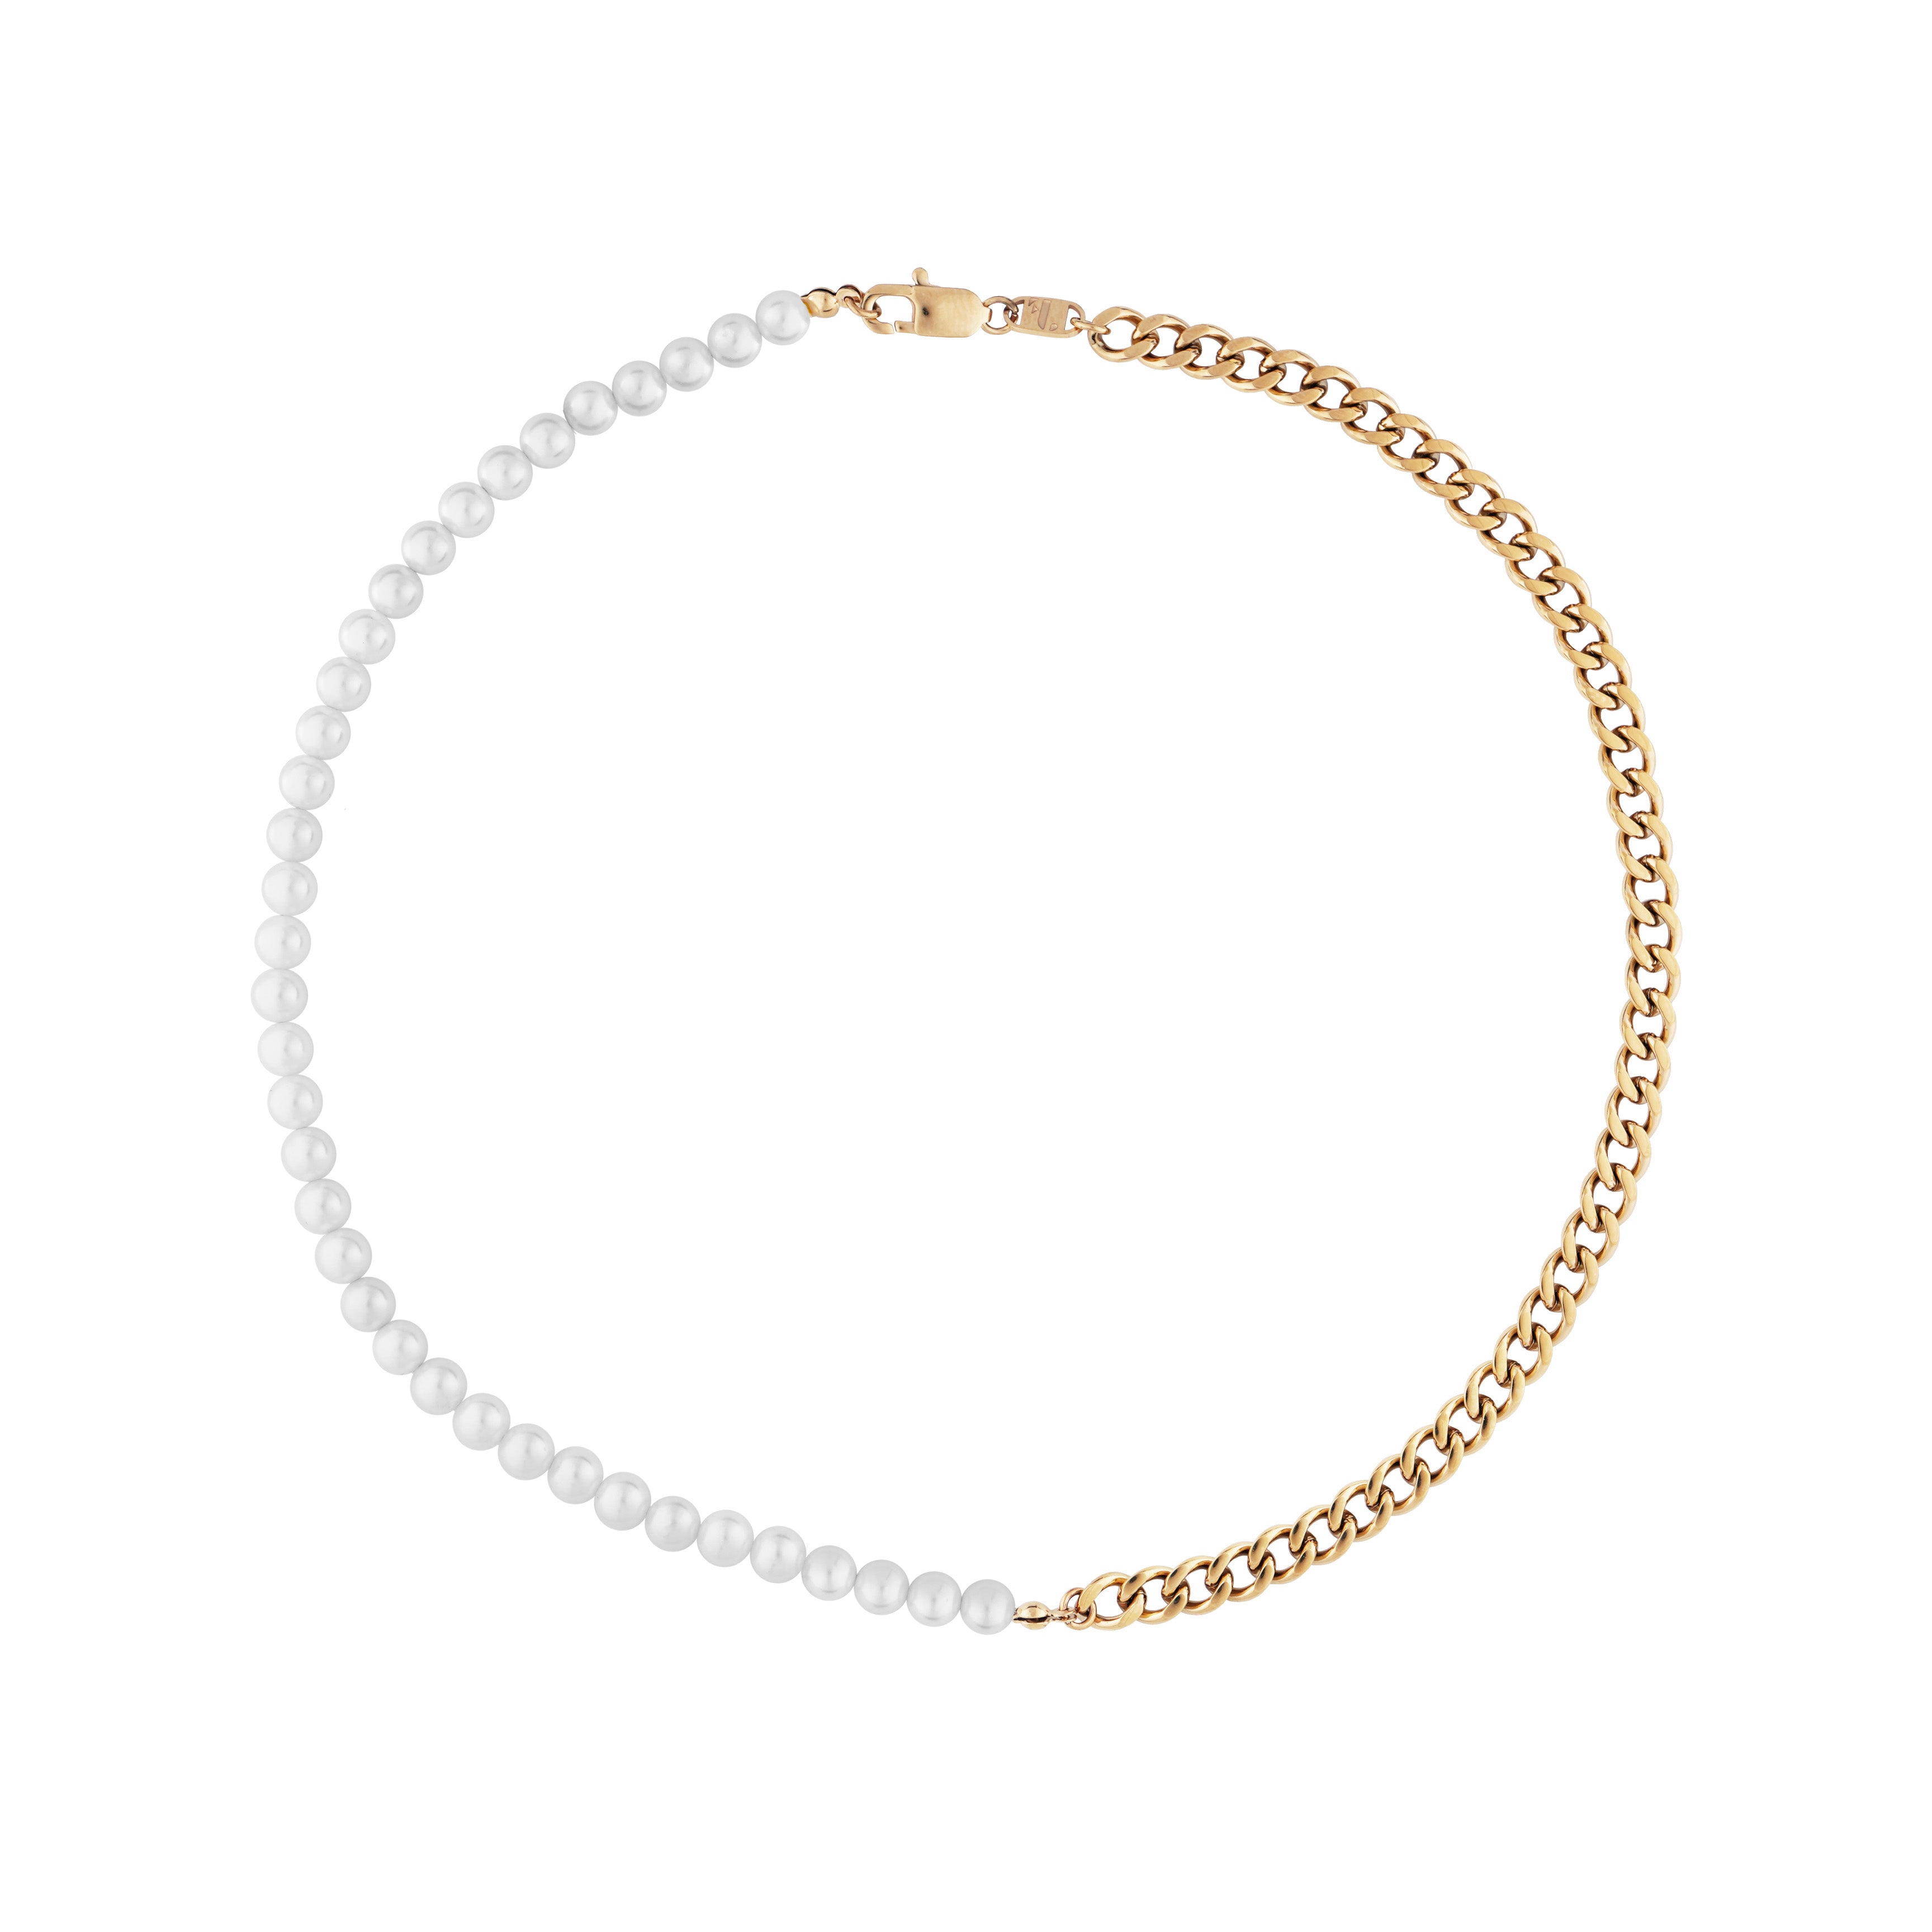 Volga men's necklace by Five Jwlry, uniquely crafted with a combination of half gold Cuban chain and half white pearls, measuring 50cm in length. Made from water-resistant 316L stainless steel. Hypoallergenic with a 2-year warranty.